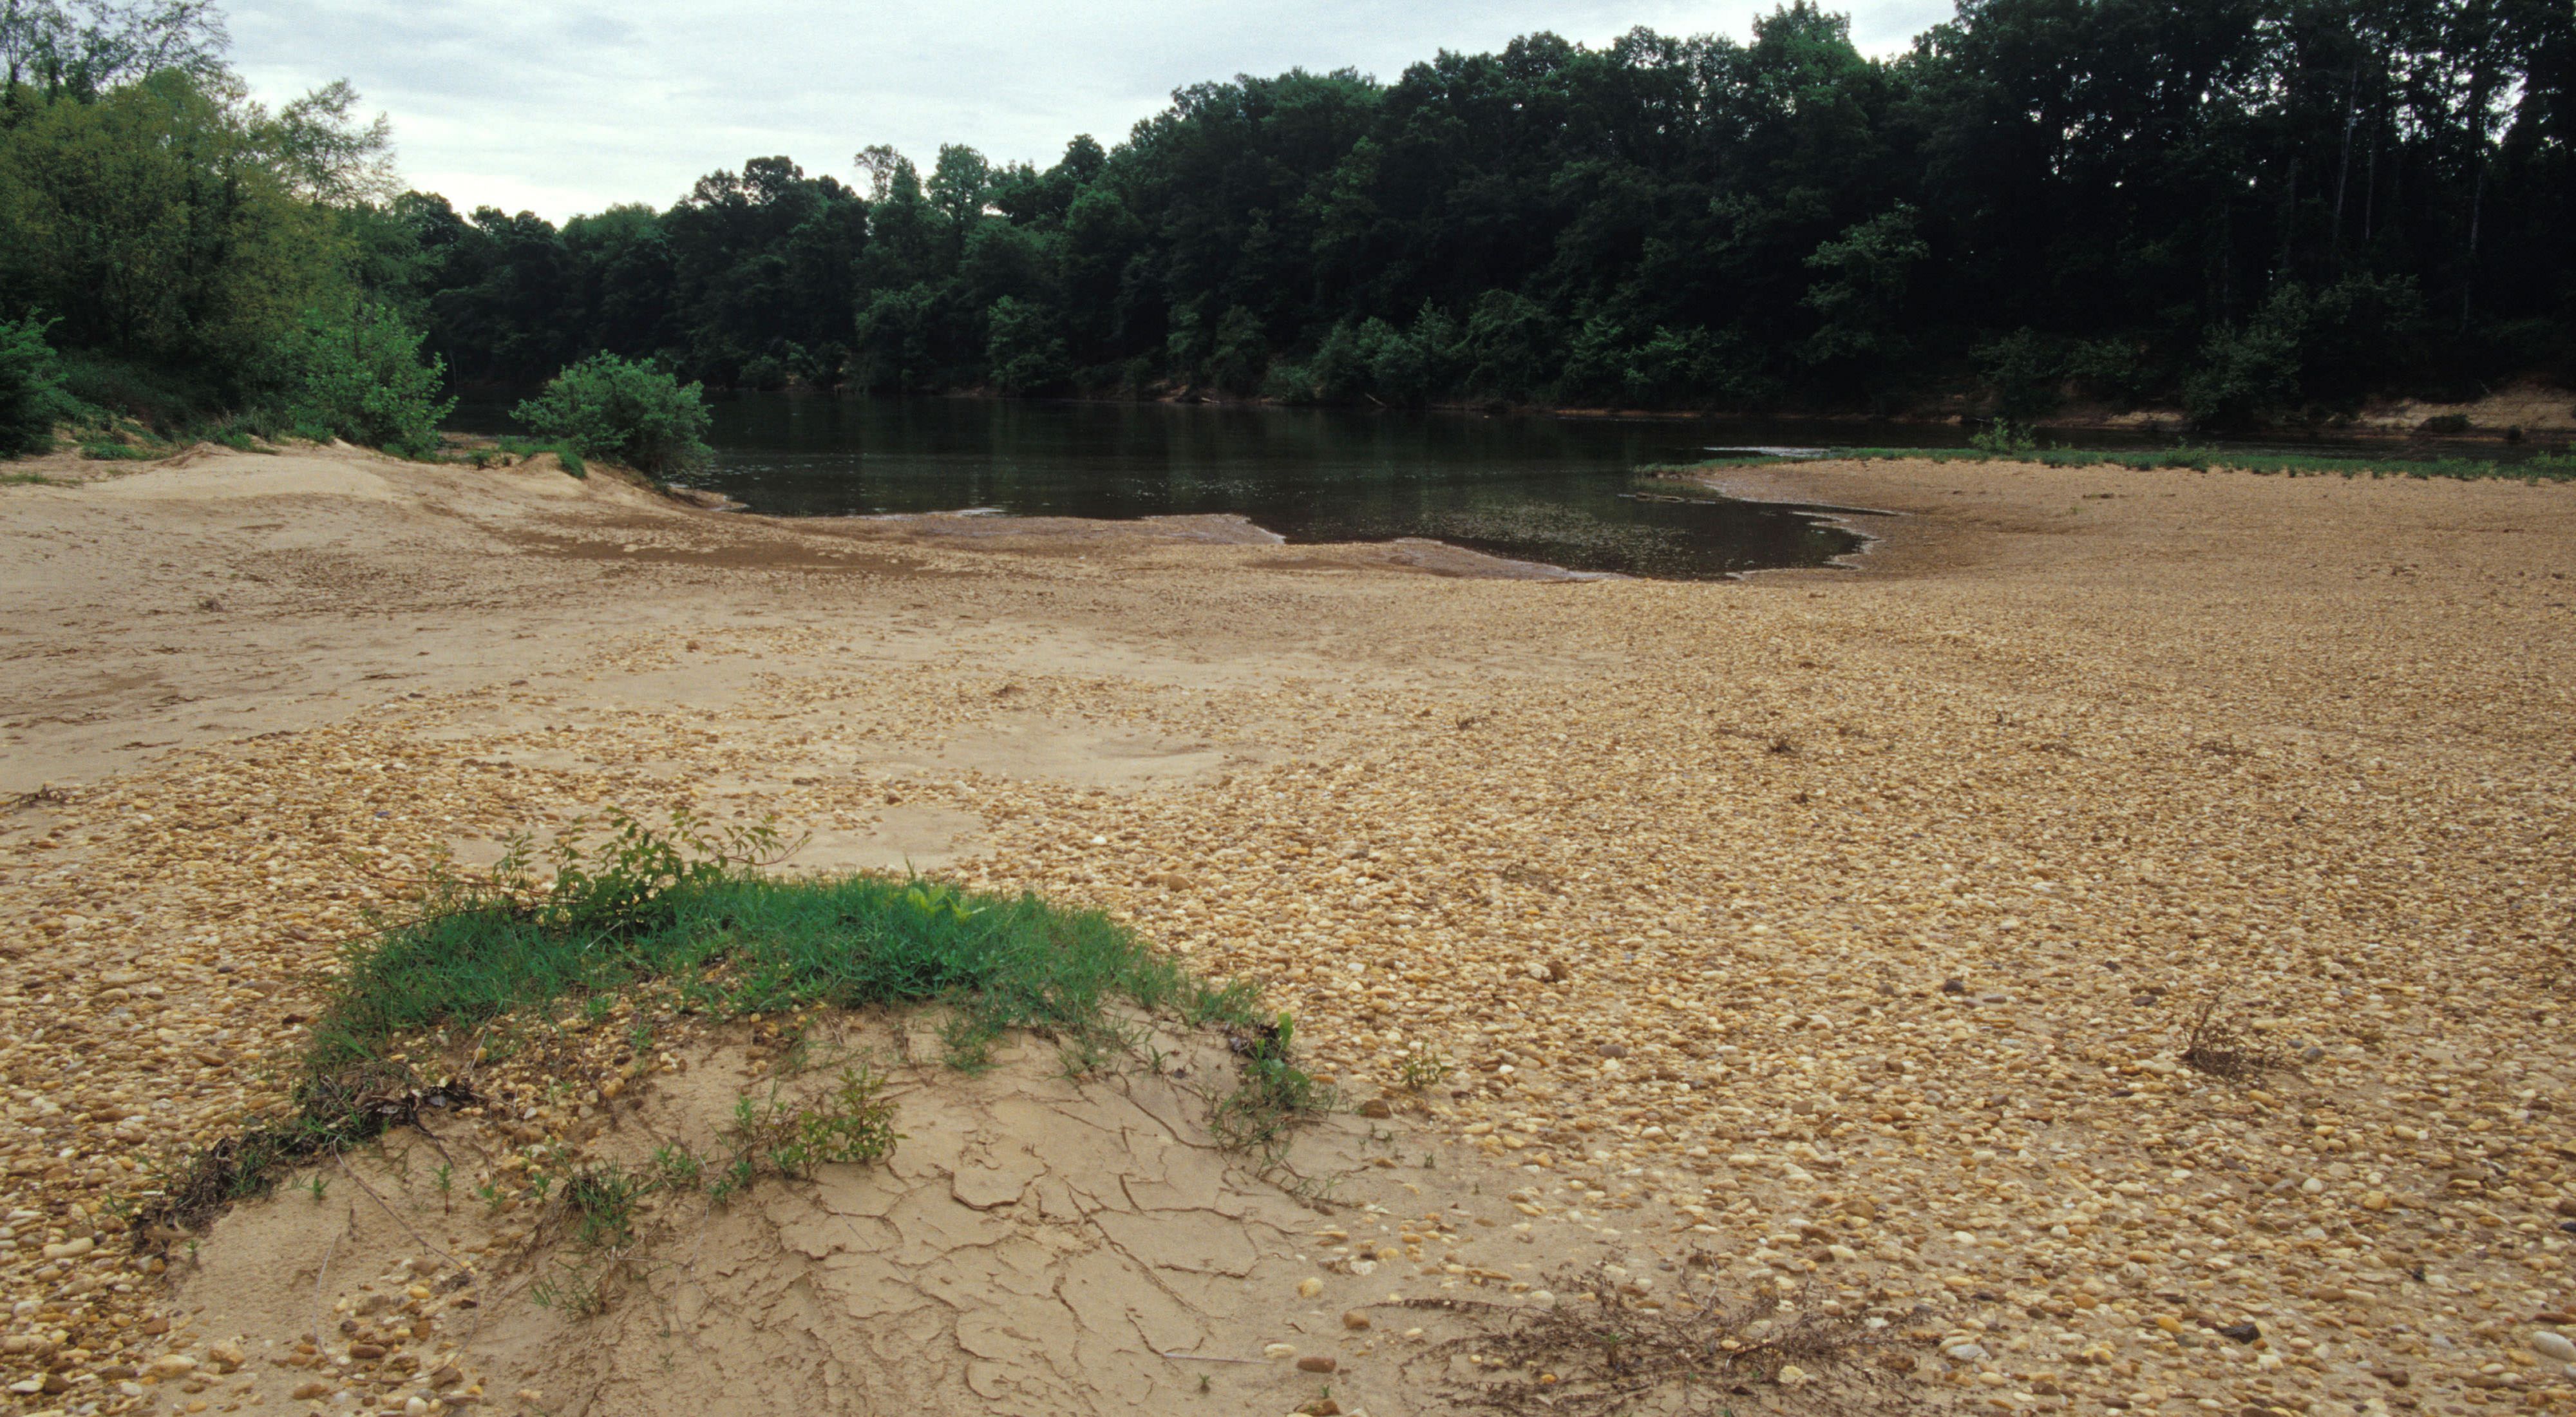 April 2002. Sand and gravel beach, with Cahaba River in mid-distance at Barton's Beach Preserve in Alabama.